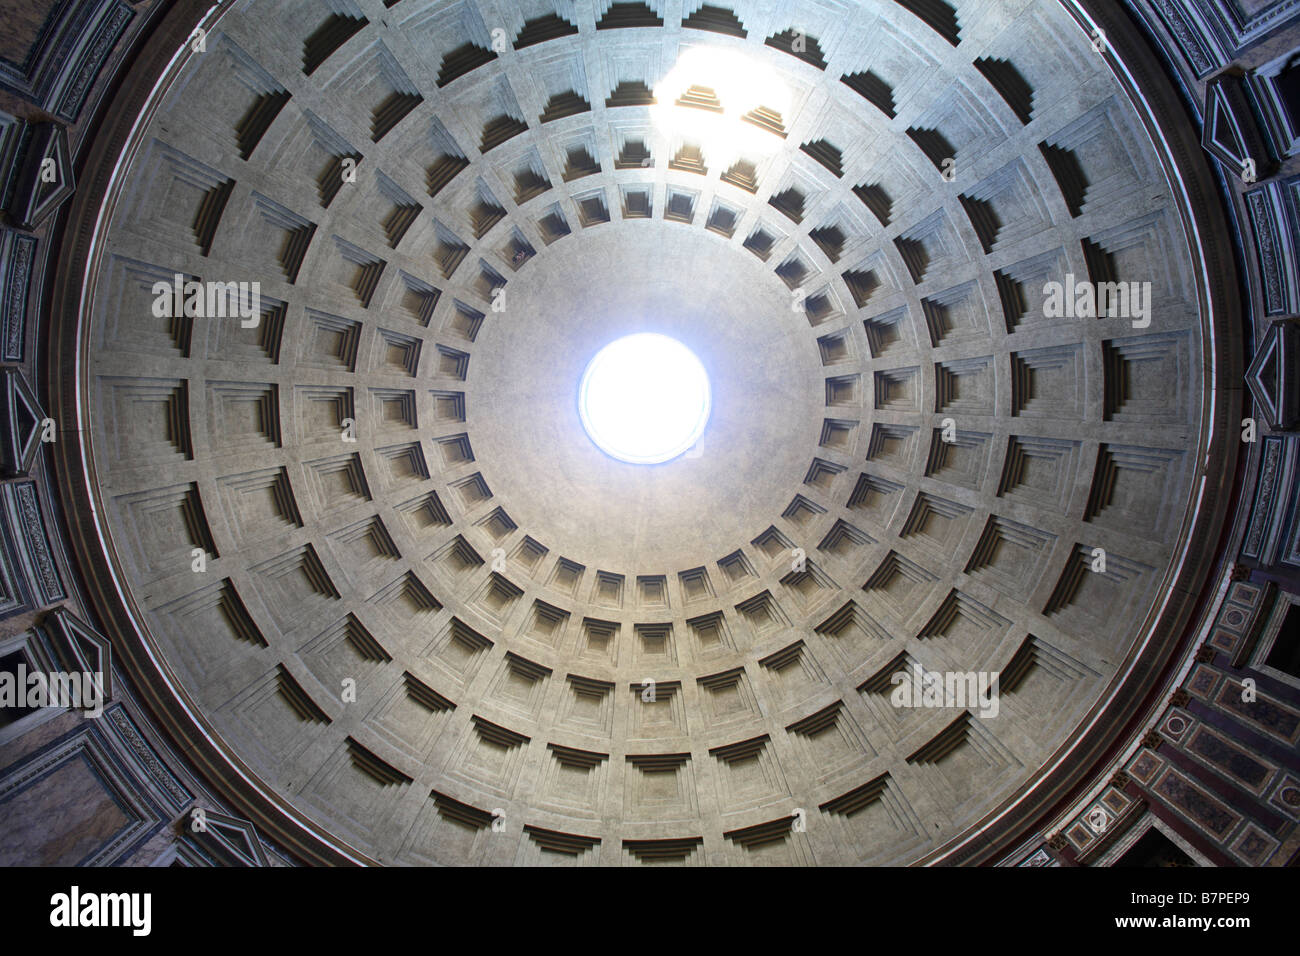 Interior of the Pantheon's dome, Rome, Italy Stock Photo